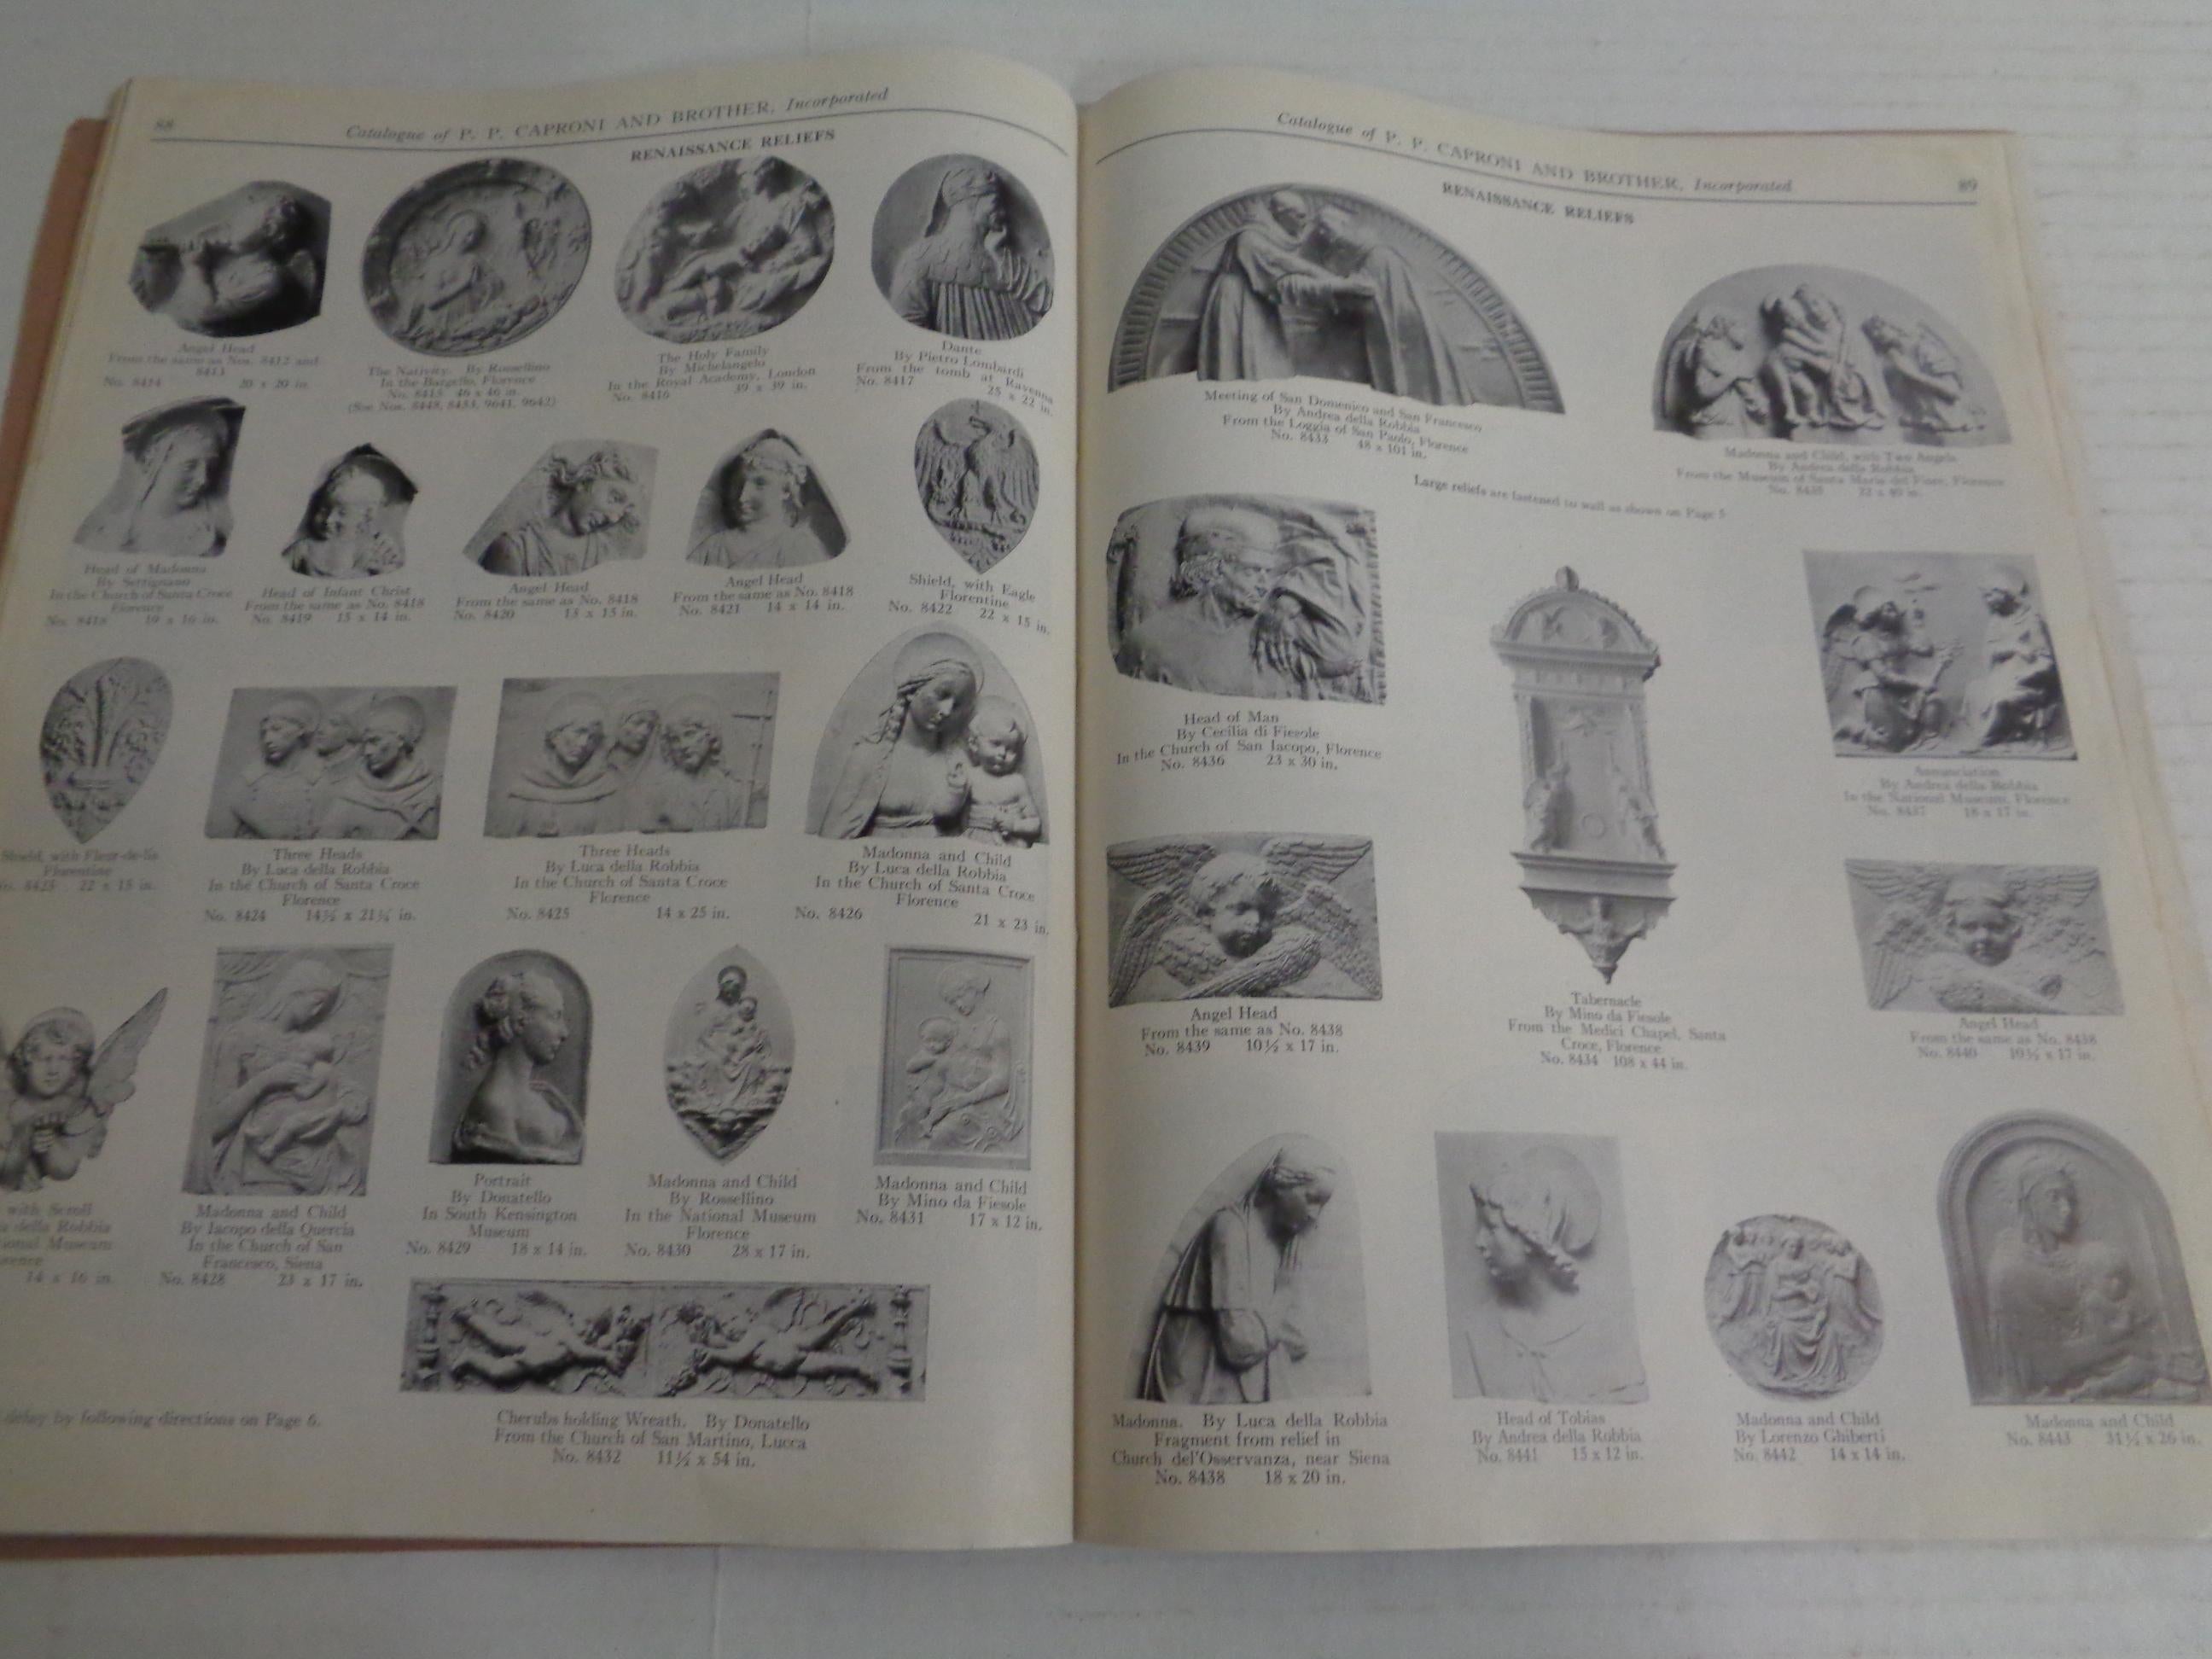 Caproni Casts: Masterpieces of Sculpture - 1932 Caproni Brothers Catalogue  For Sale 1